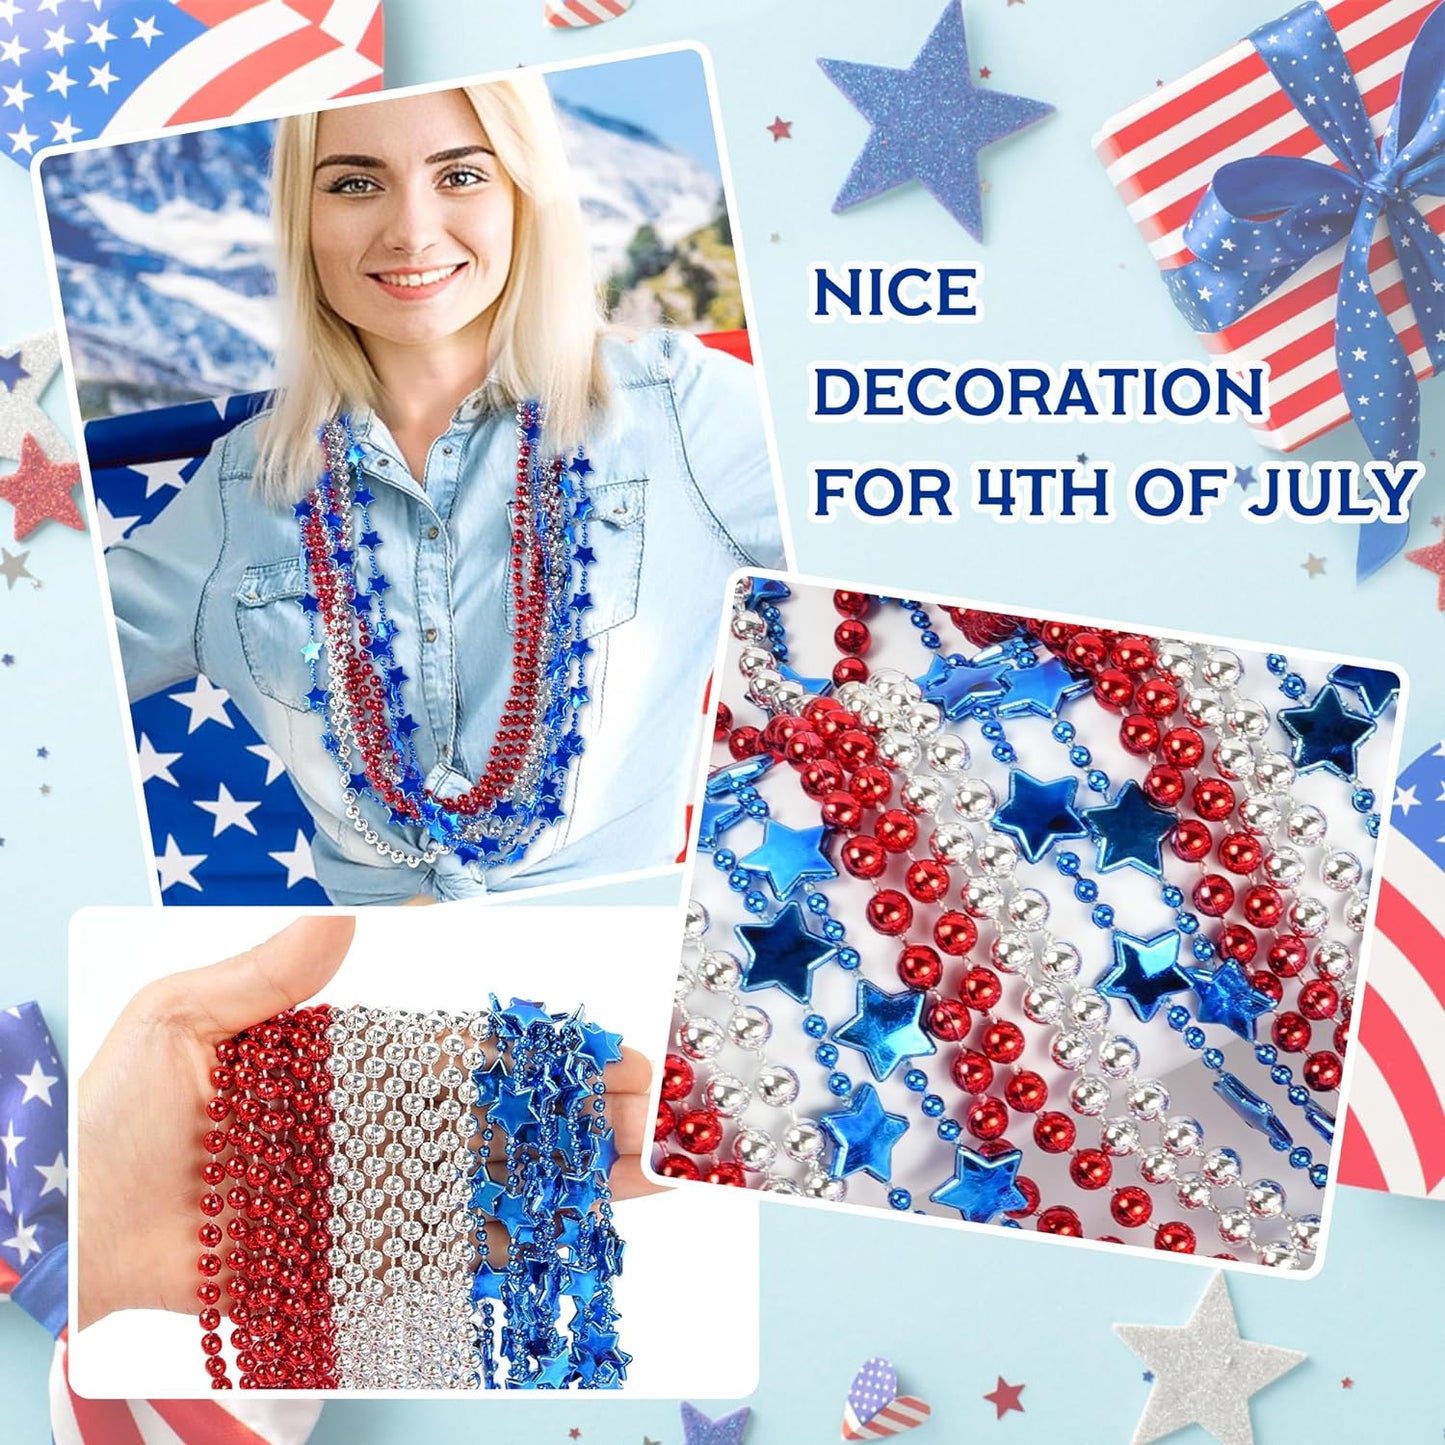 4Th of July Beaded Necklace, 24Pcs Patriotic Star Bead Necklaces Red Silver and Blue Accessories,Fourth of July Beads for Independence Day,Memorial Day Patriotic Parades,Party Decor Supplies